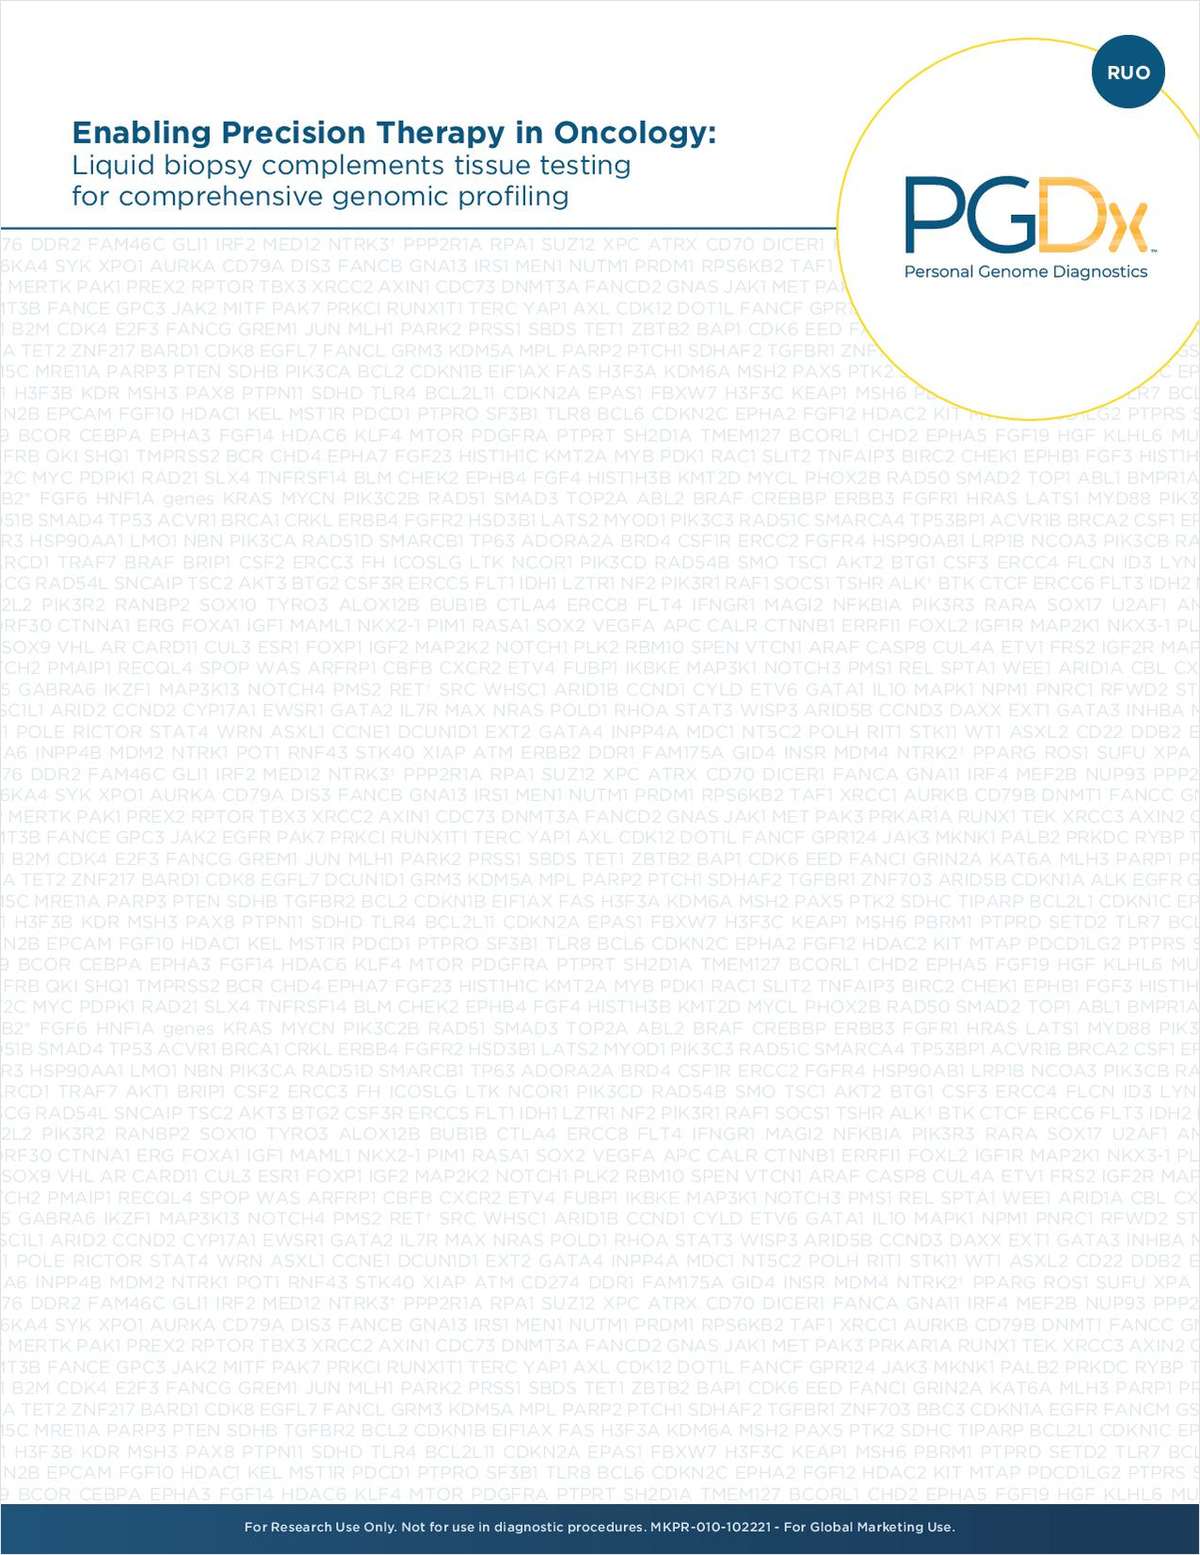 Enabling Precision Therapy in Oncology: Liquid biopsy complements tissue testing for comprehensive genomic profiling